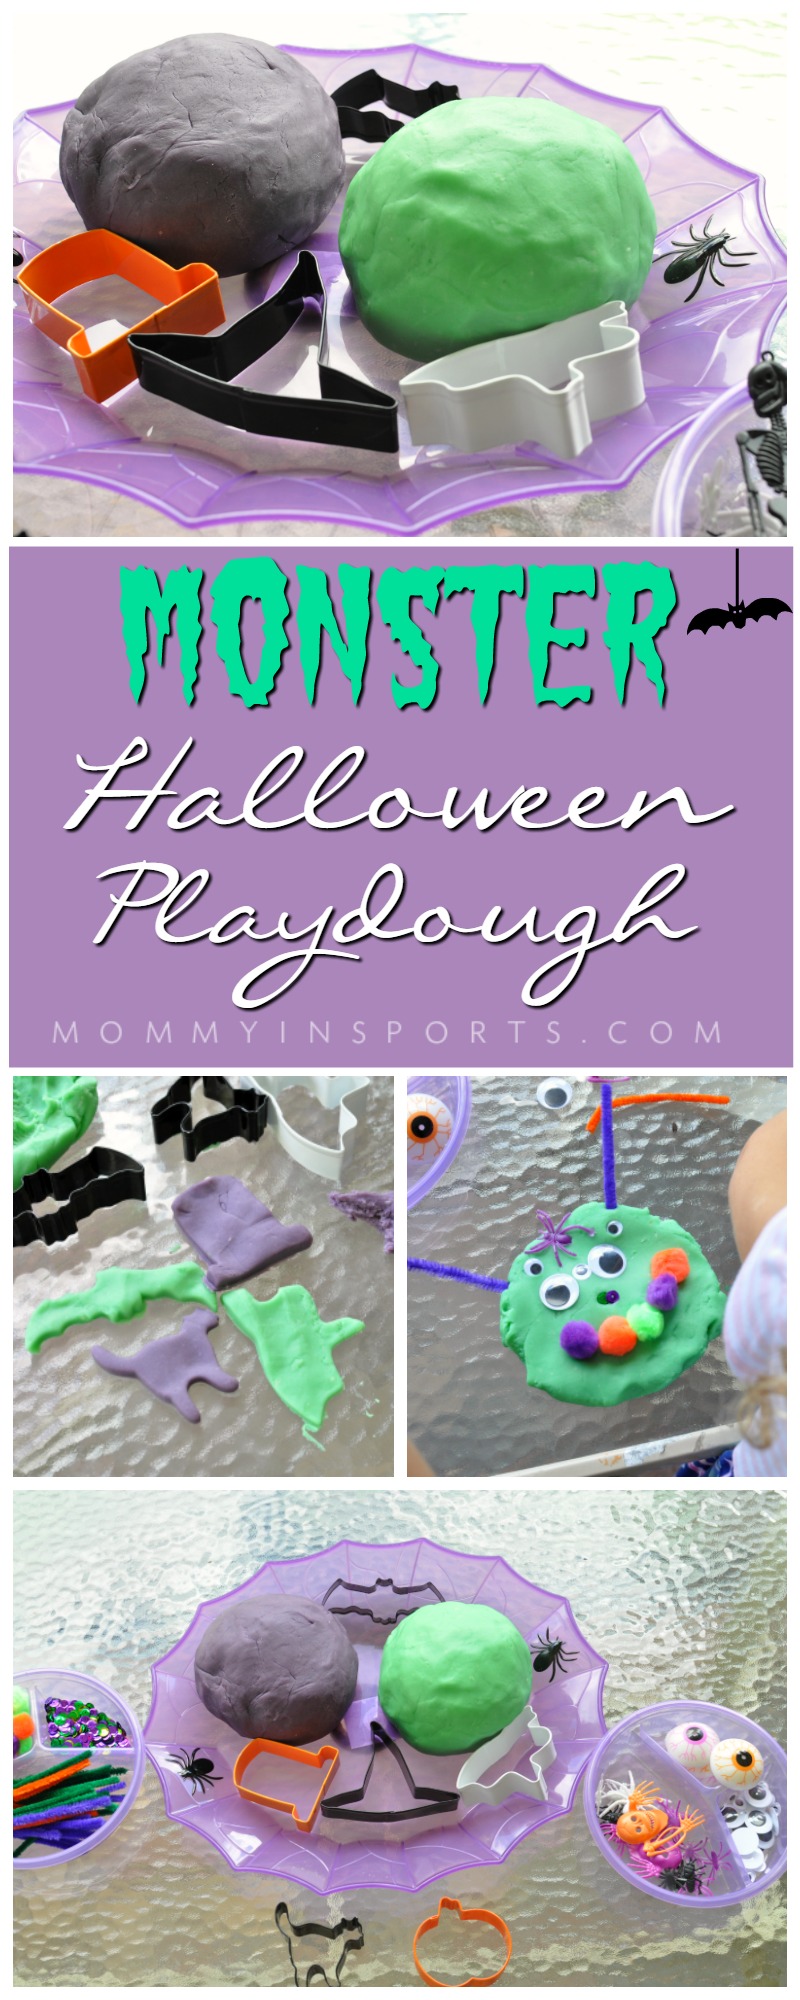 It's that time of your for spooky ghosts and goblins! Make this Monster Halloween Play Dough and wow your kids with a fun and easy art project!